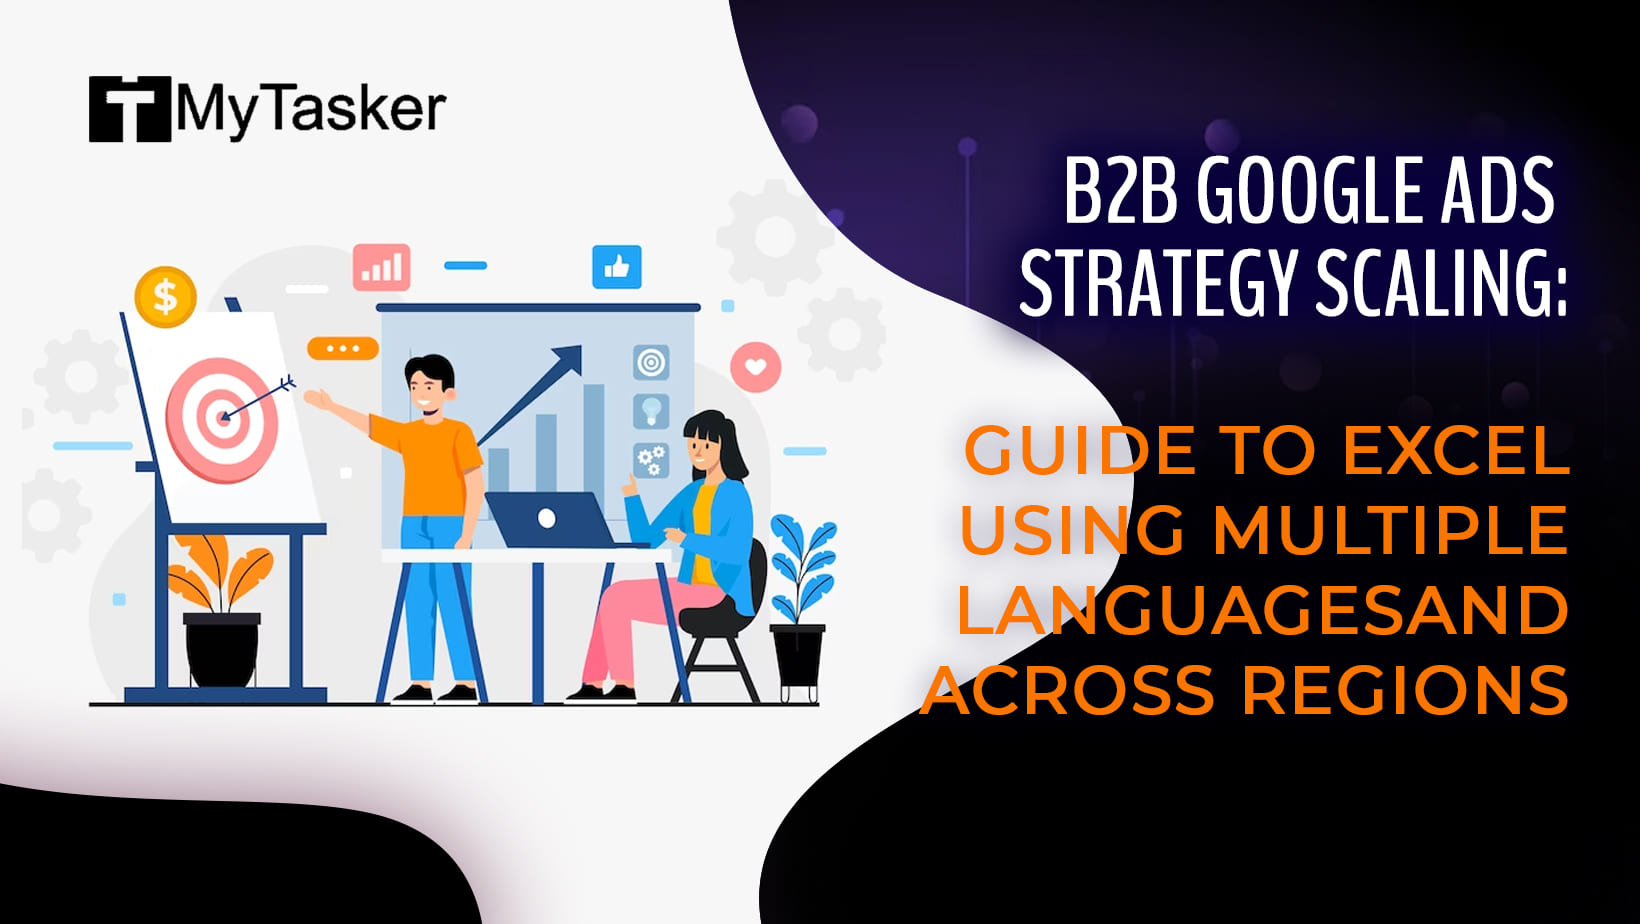 B2B Google Ads Strategy Scaling - A Guide To Excel Using Multiple Languages and Across Regions